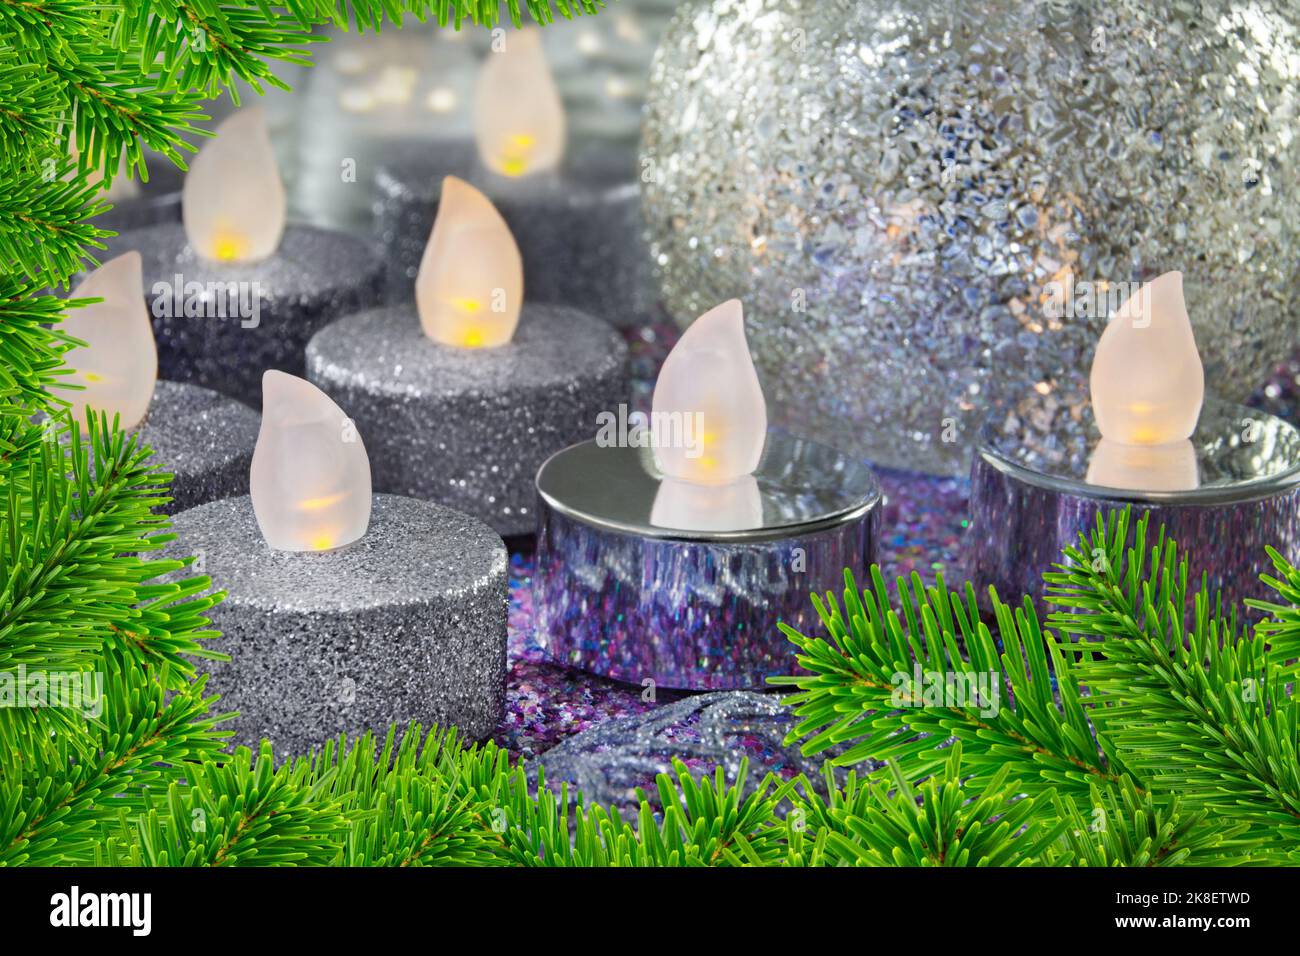 Electric LED Lights with Christmas decoration and fir branches Stock Photo